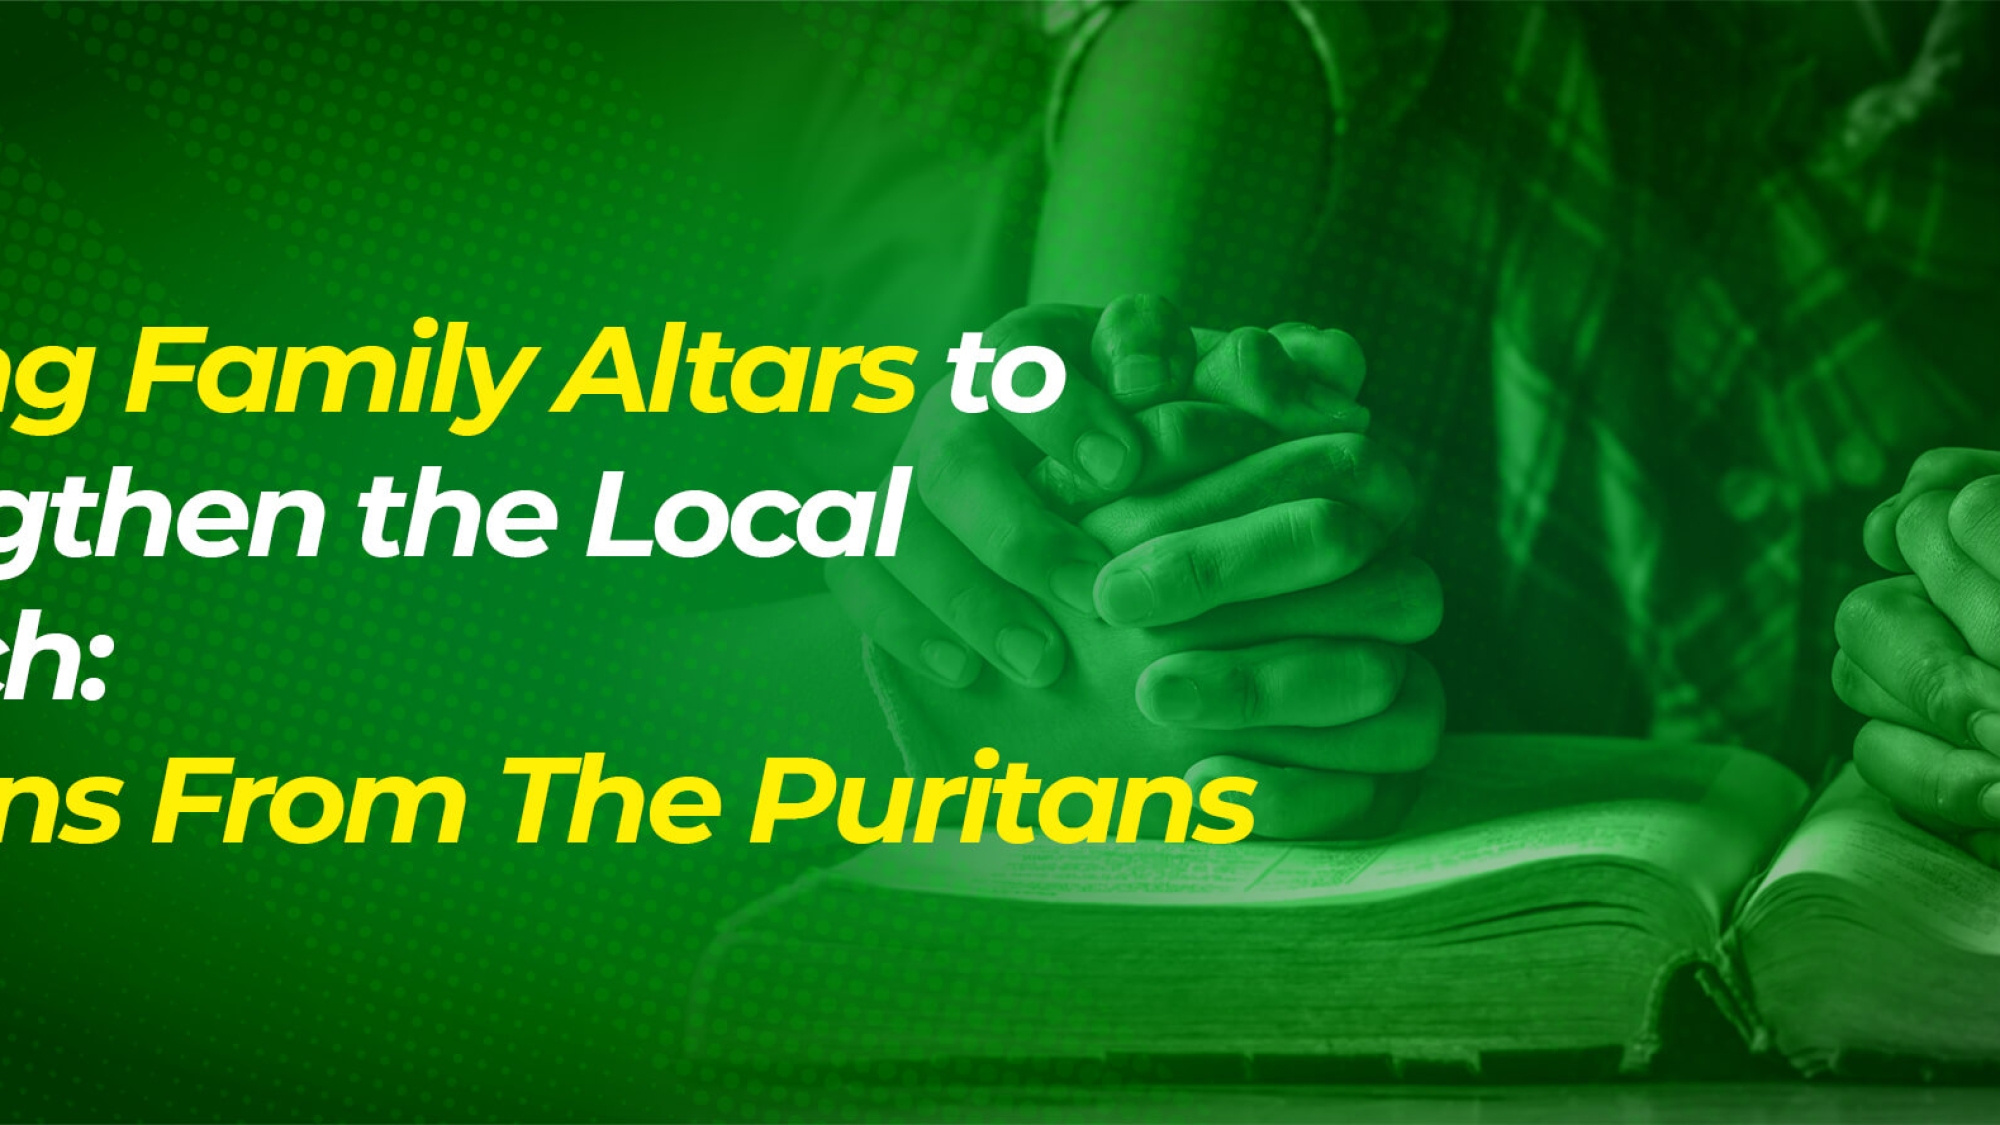 Raising Family Altars to Strengthen the Local Church Lessons From The Puritans